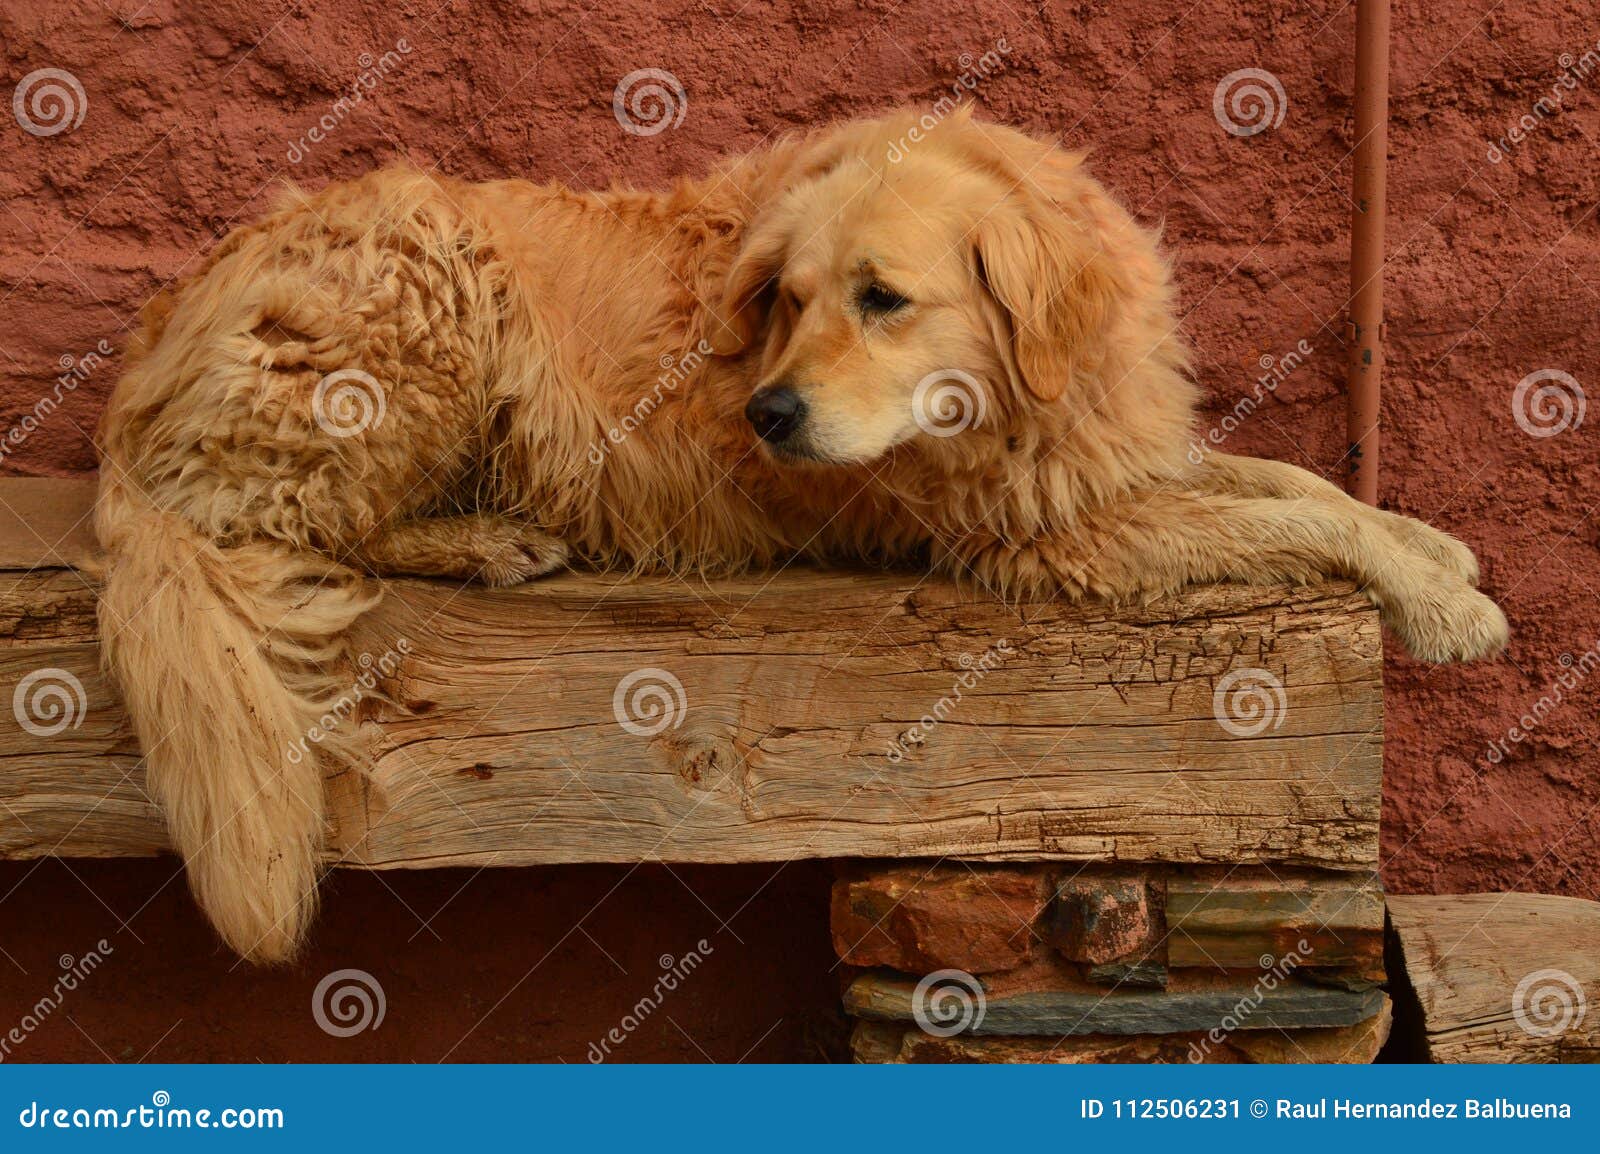 lovely golden dog resting on a bench in a picturesque village with black slate roofs in madriguera. animals holidays travel rural